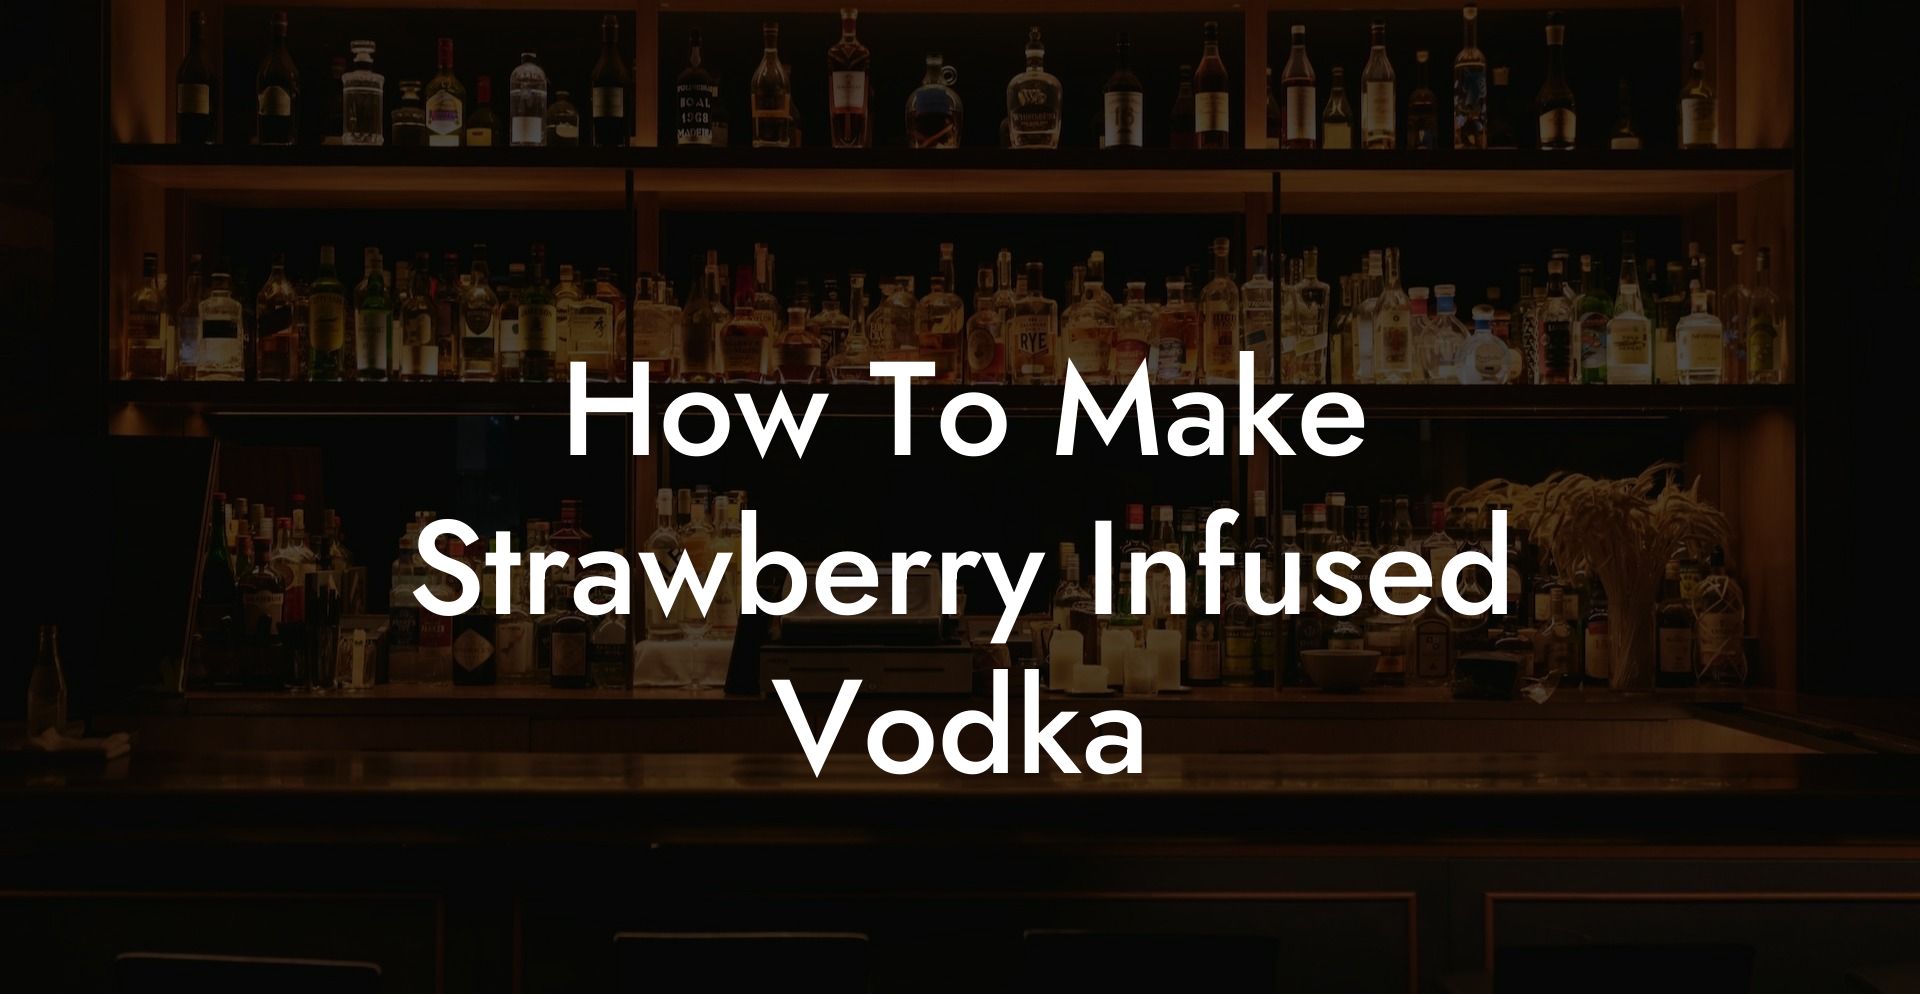 How To Make Strawberry Infused Vodka